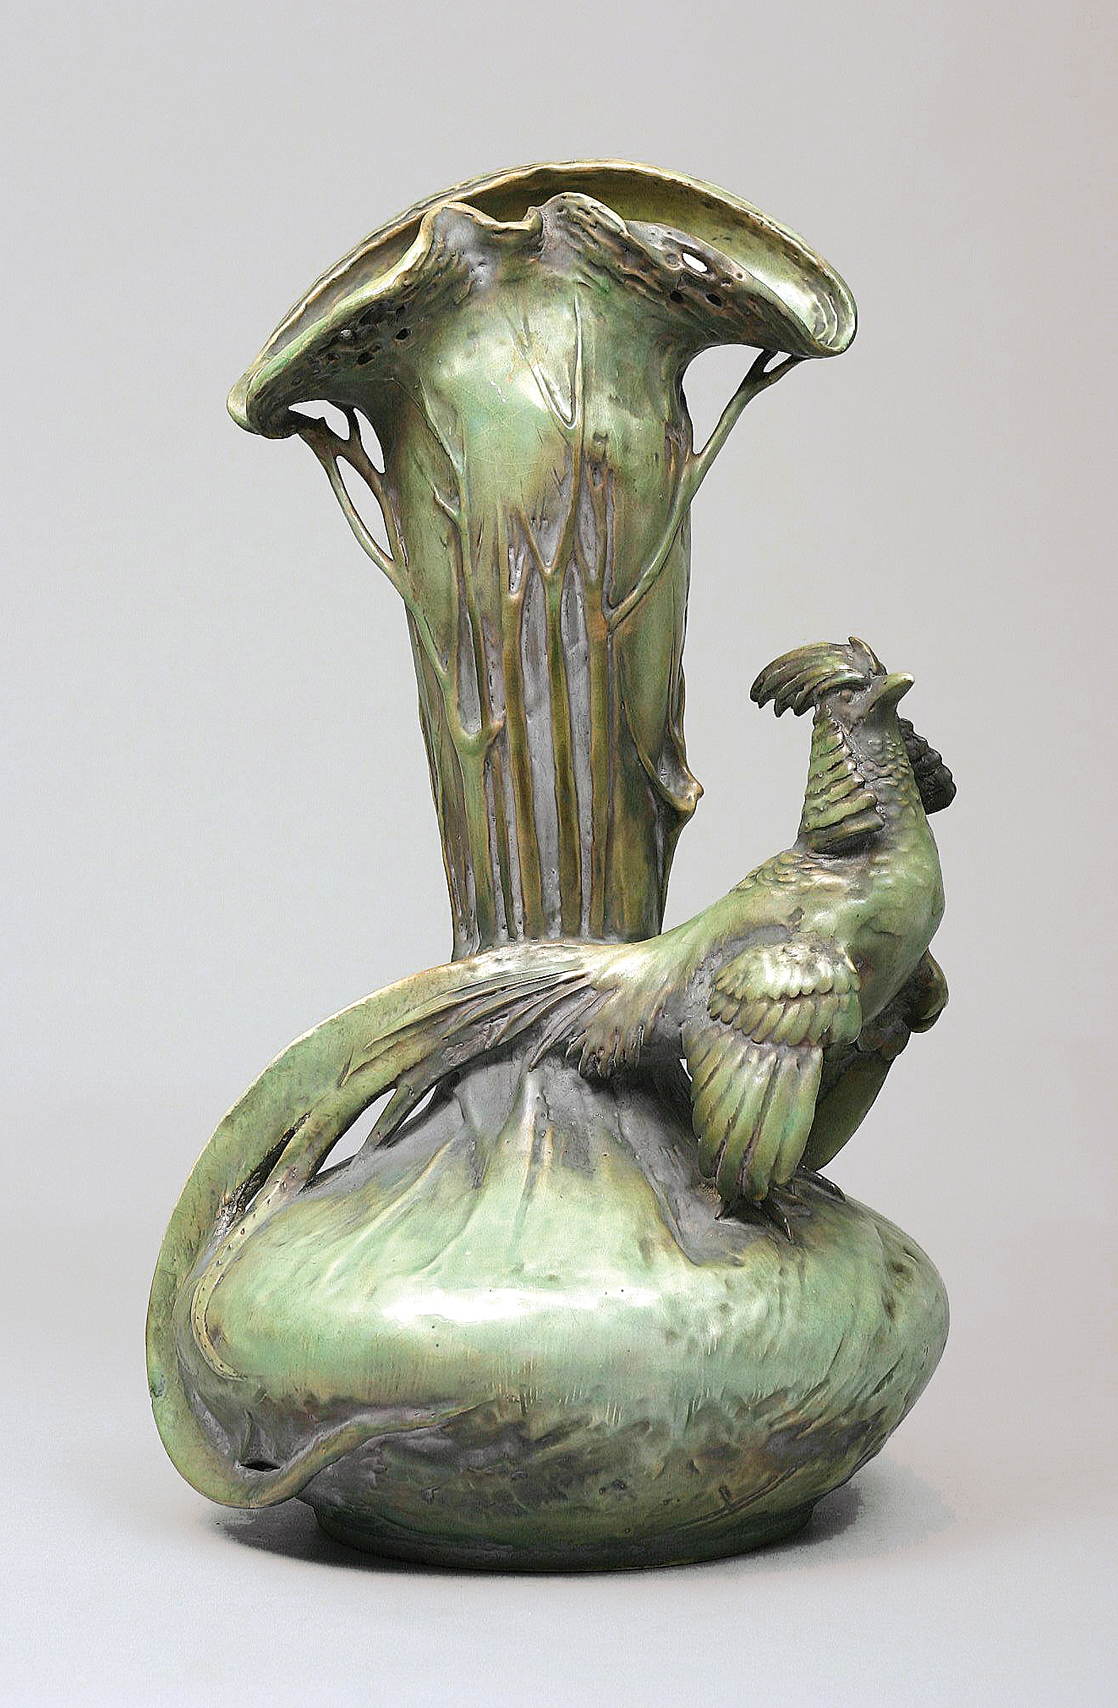 A large amphora vase with gold pheasant